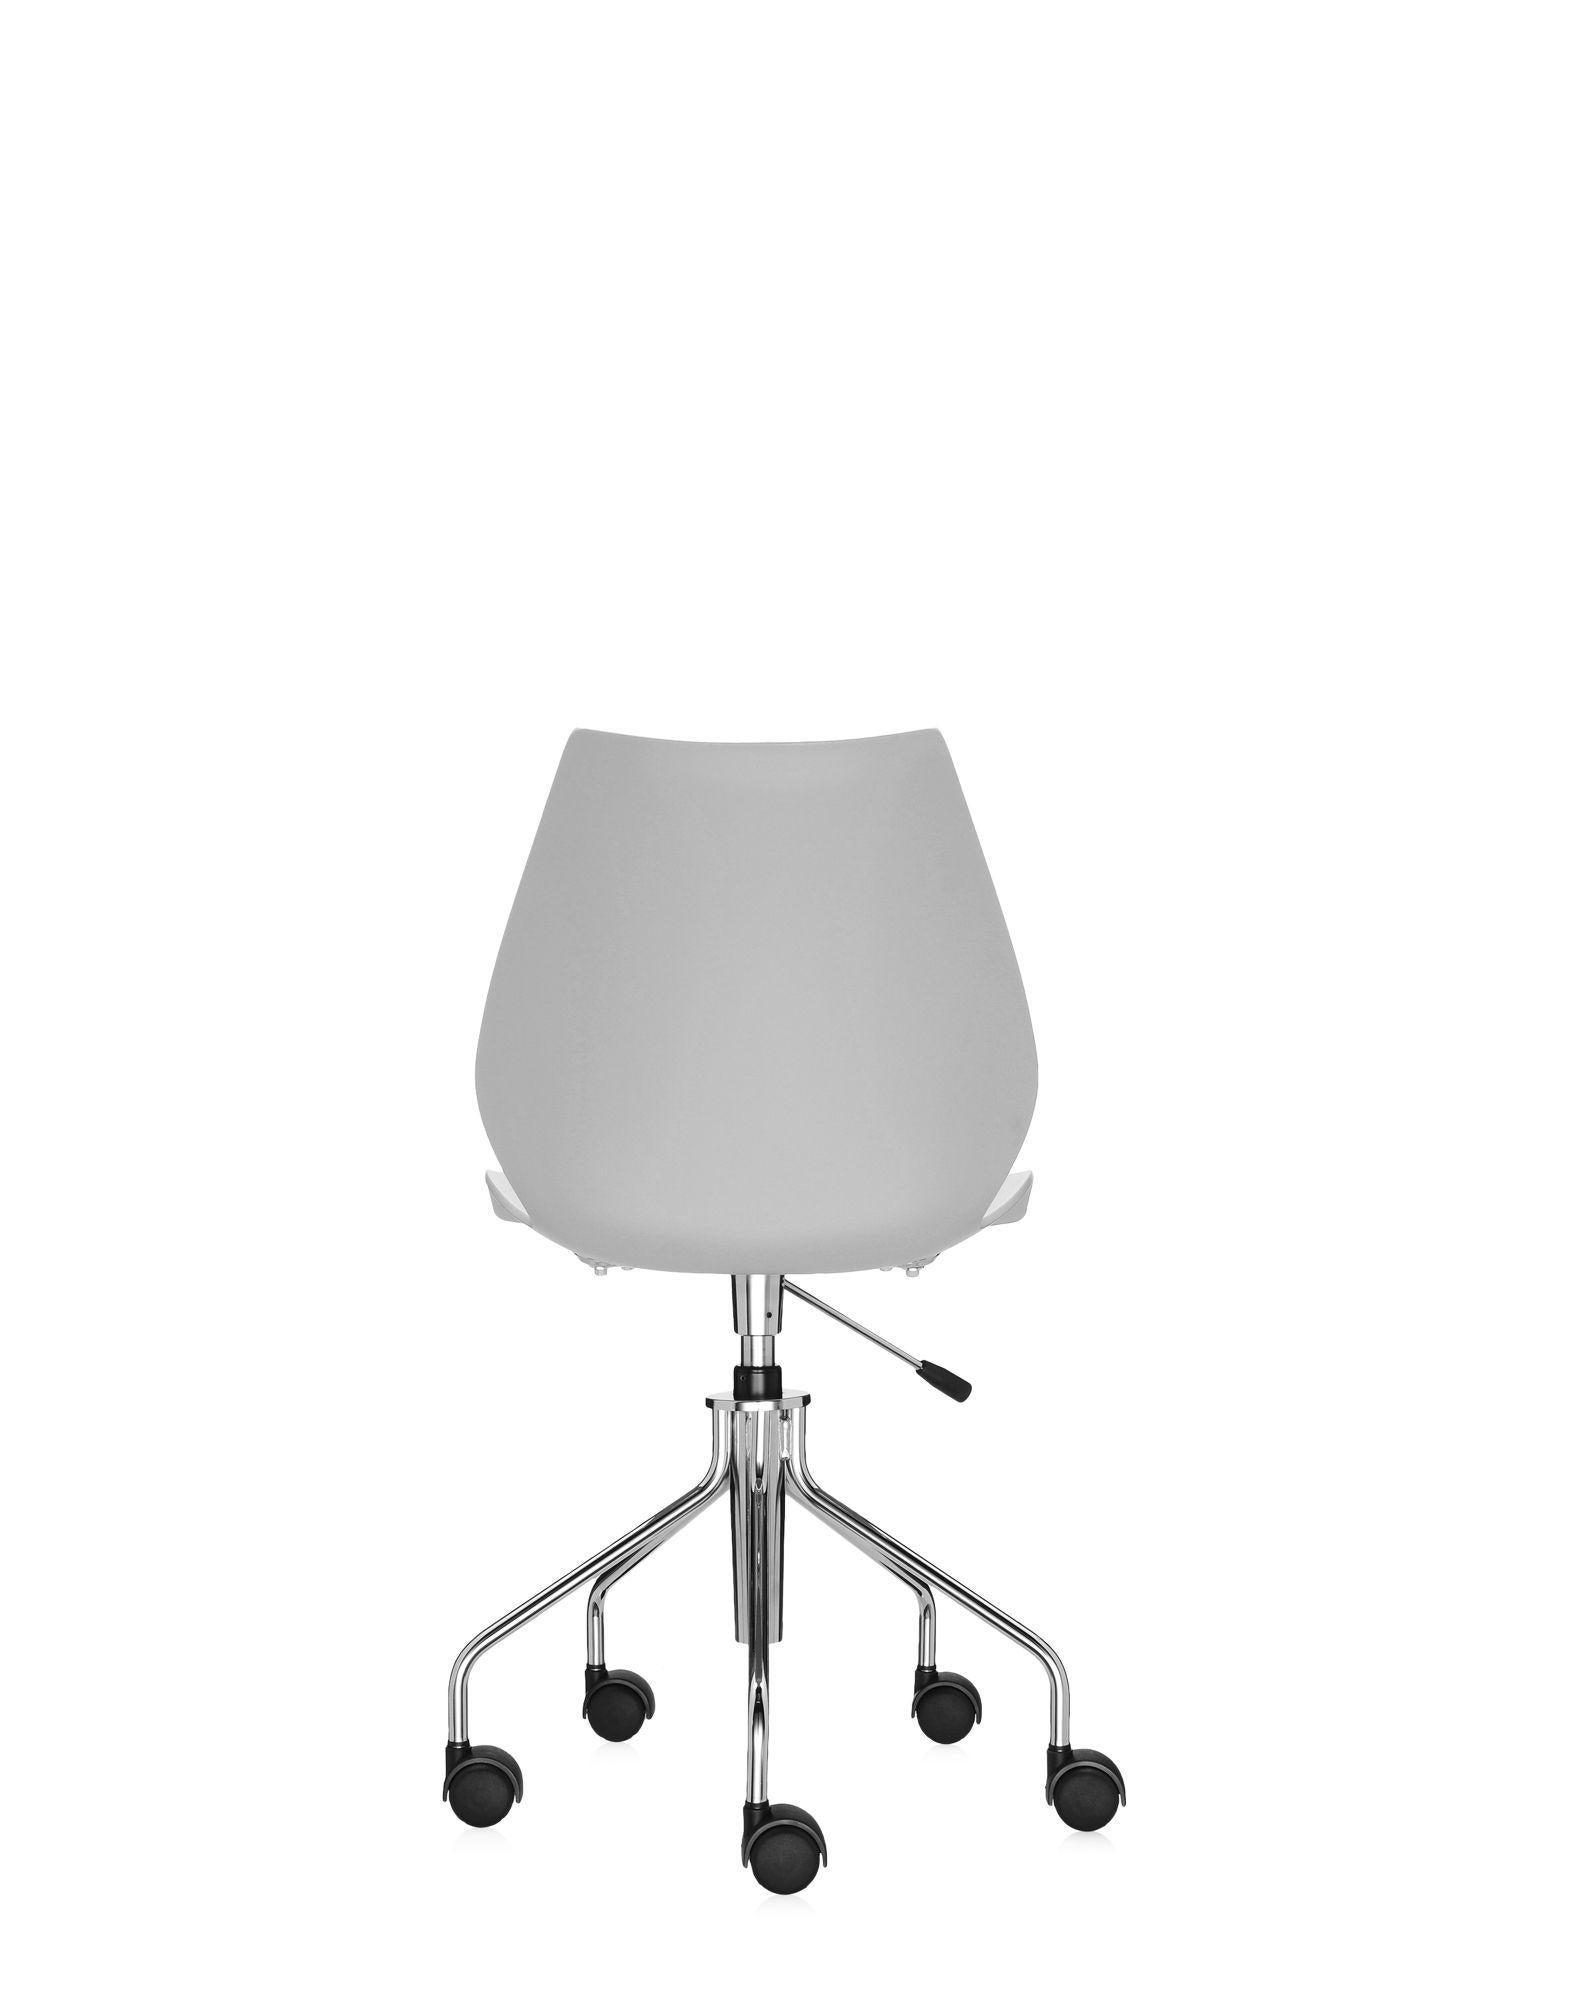 Contemporary Kartell Maui Swivel Chair Adjustable in Pale Grey by Vico Magistretti